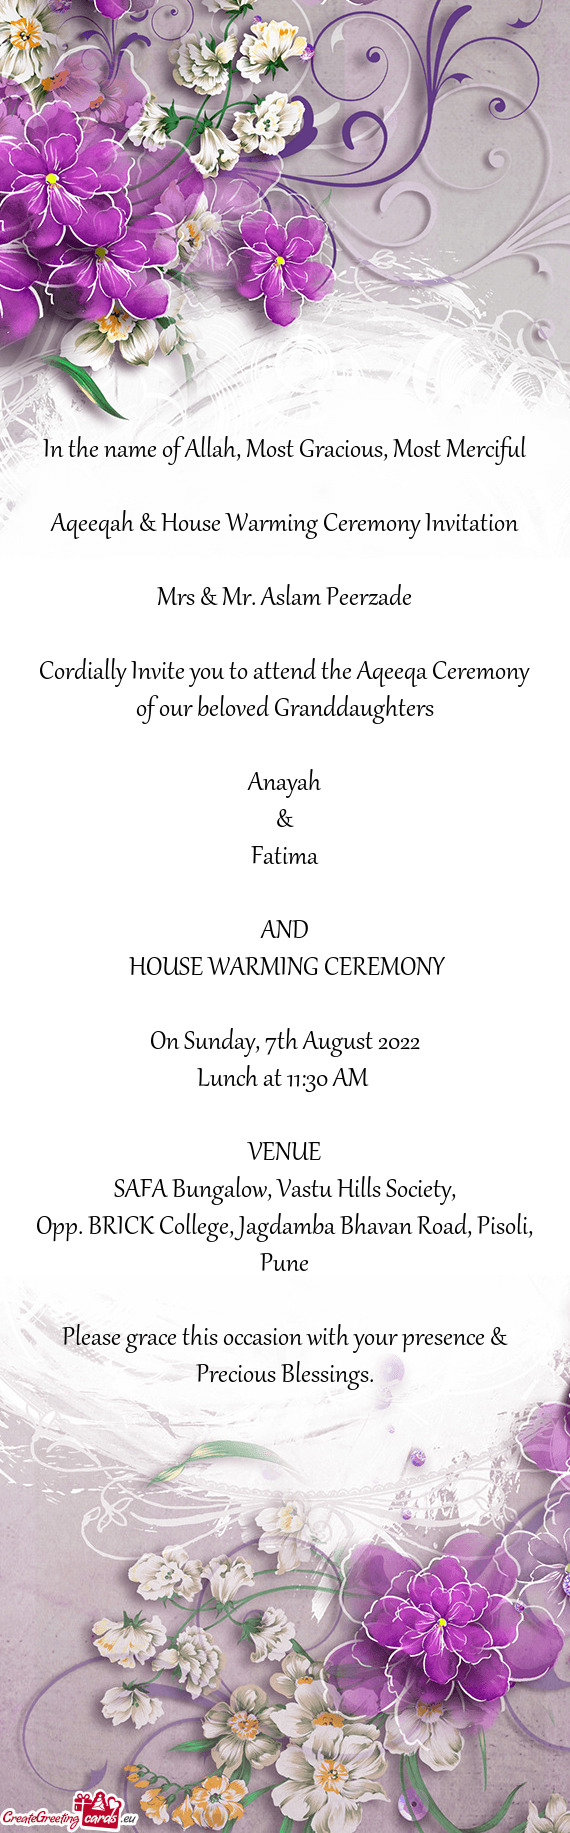 Cordially Invite you to attend the Aqeeqa Ceremony of our beloved Granddaughters